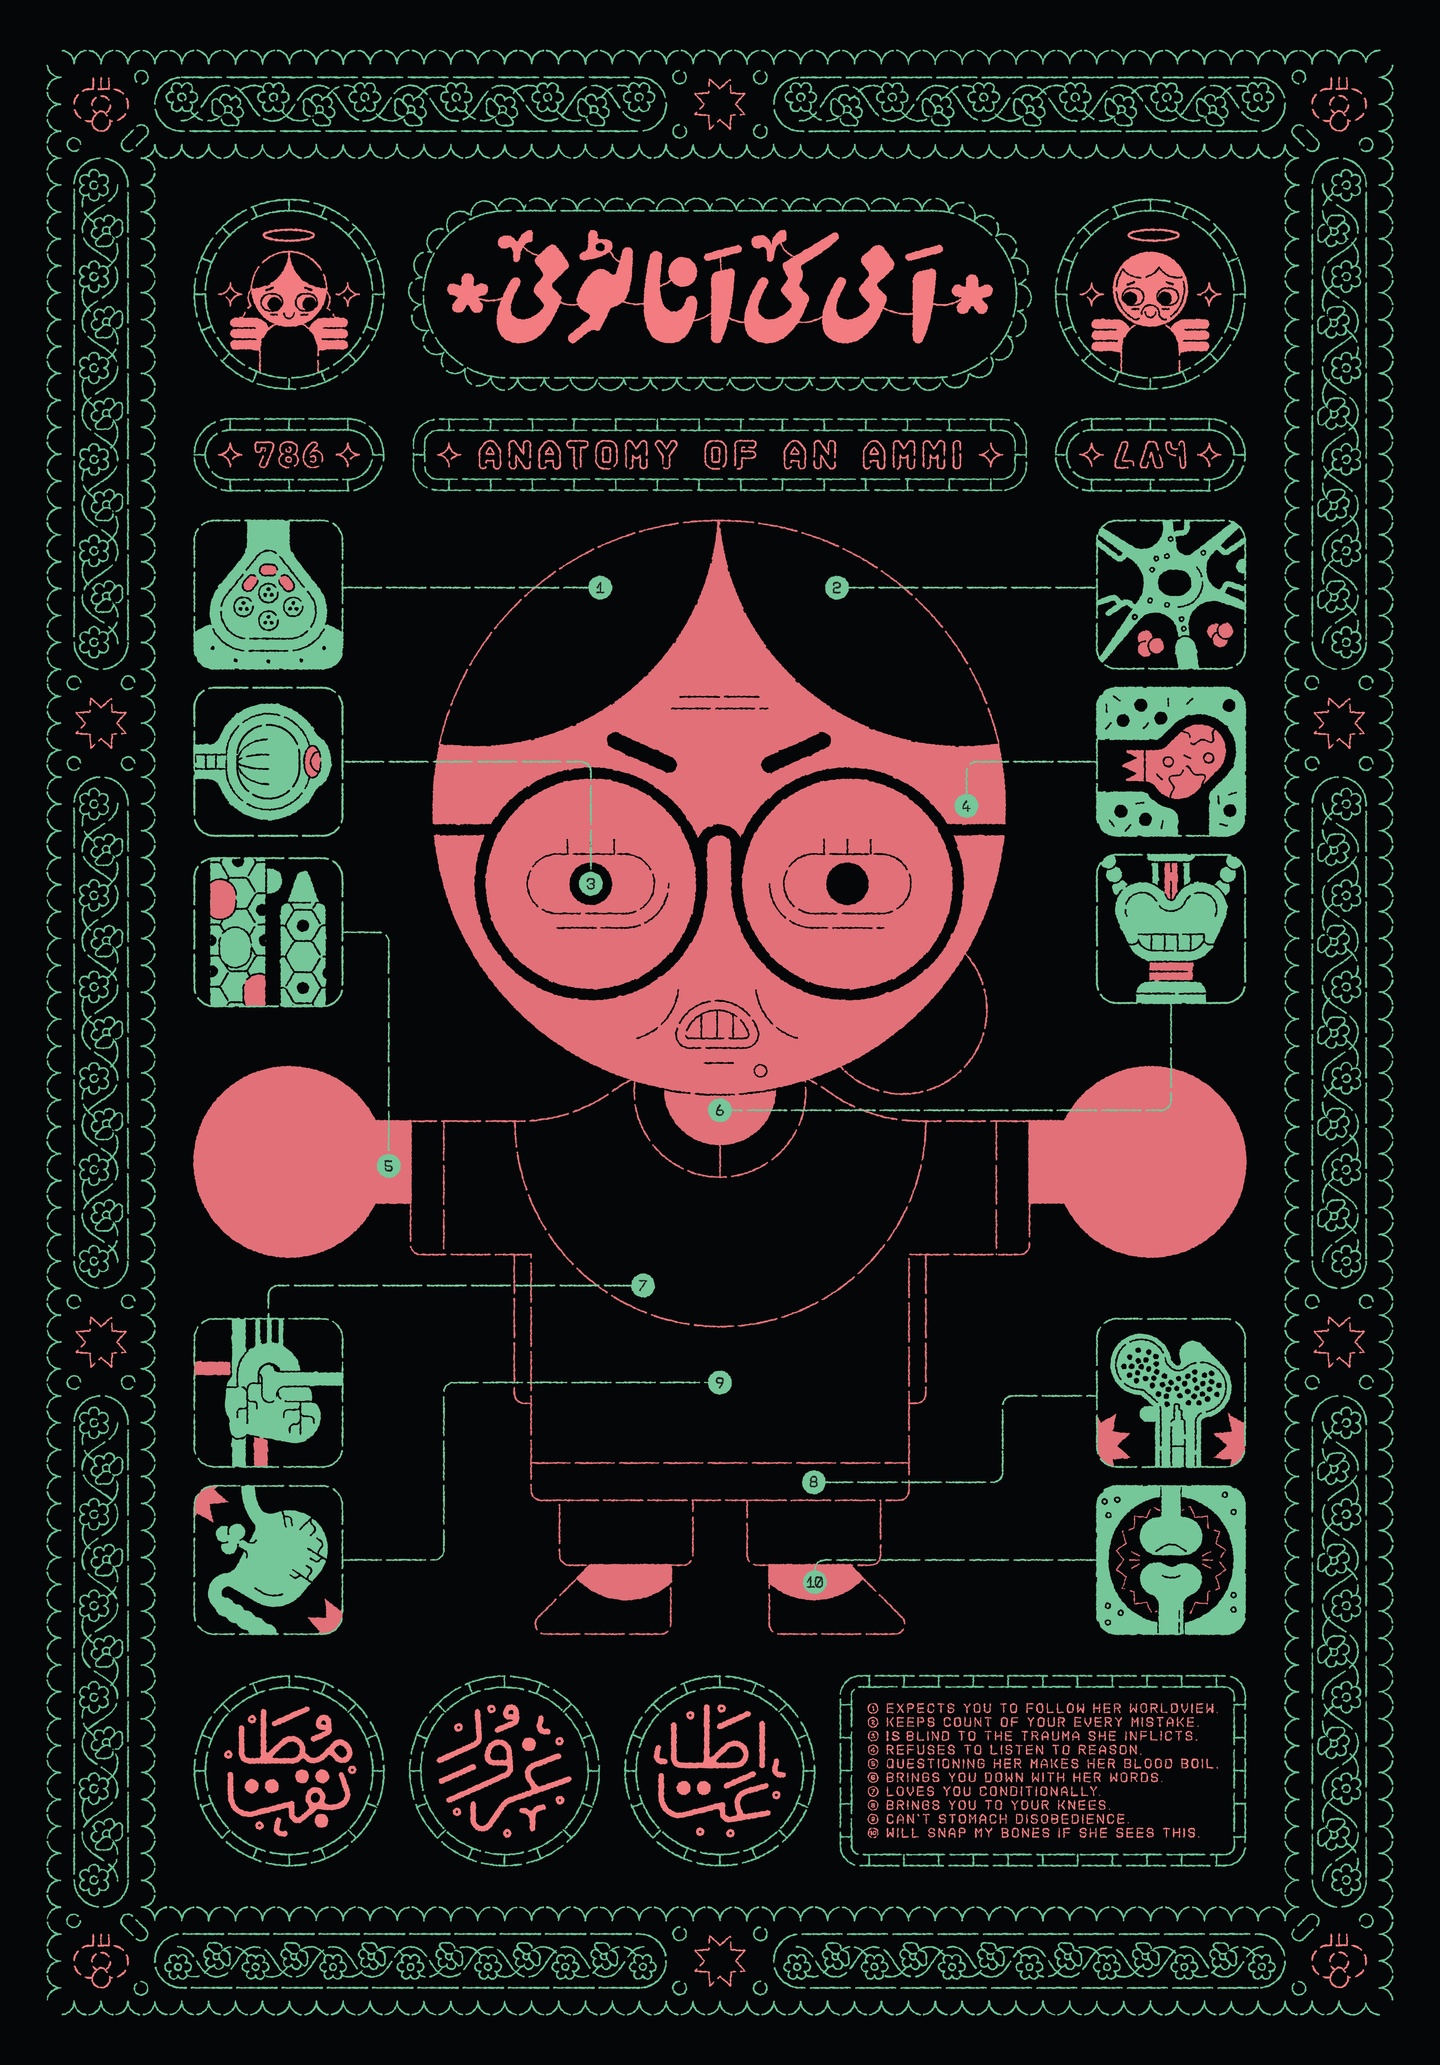 Green and pink on black illustration of a lady with her body labelled in style of a prayer mat